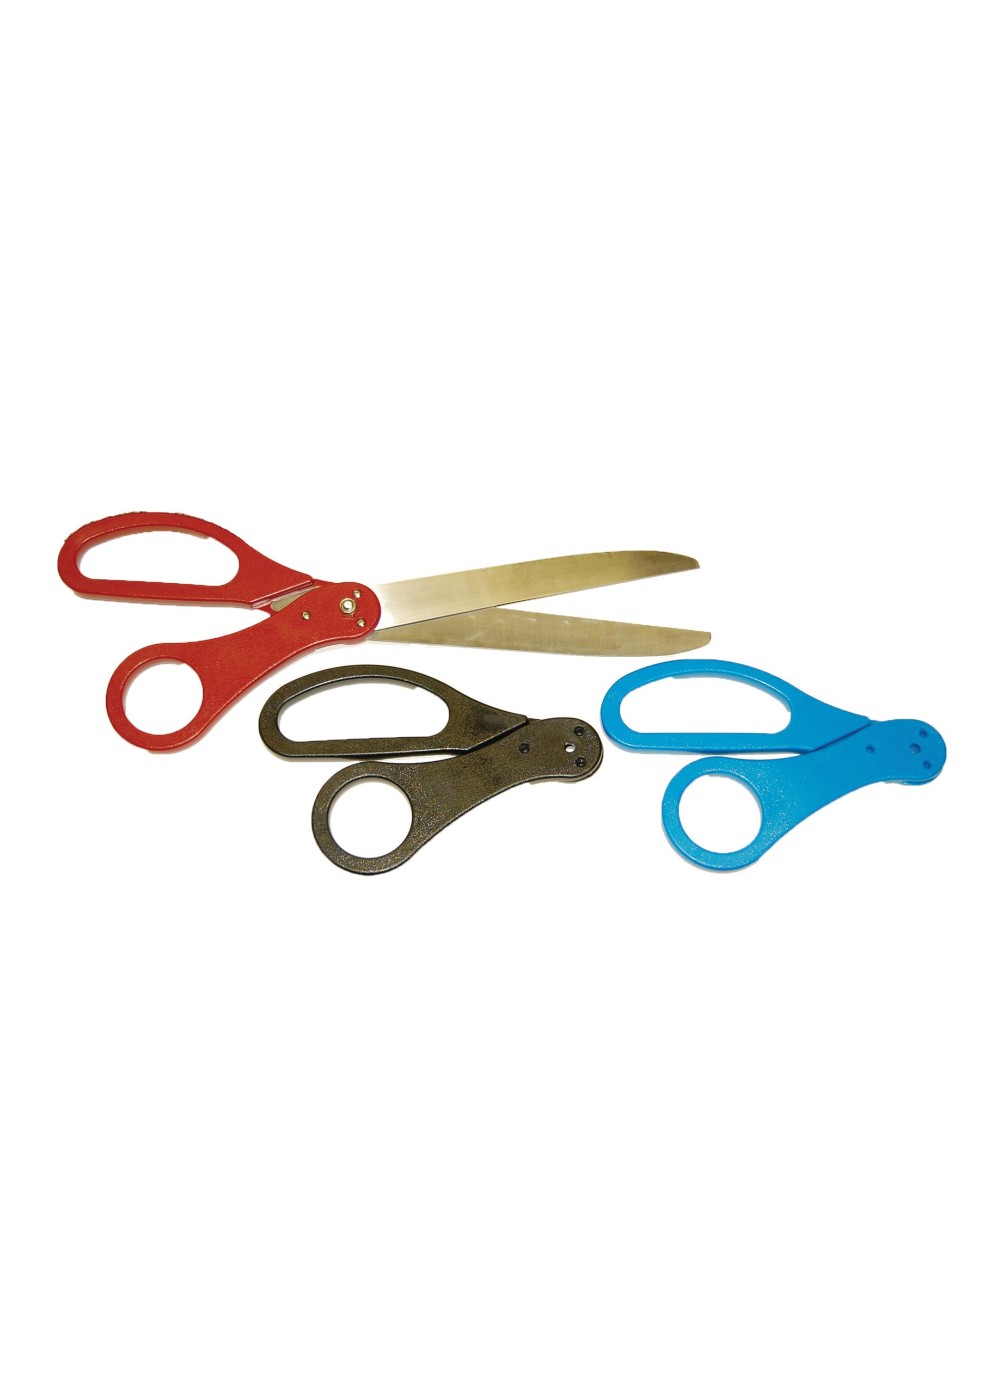 25 Inch Red Ribbon Cutting Scissors And Black And Blue Changeable Handles